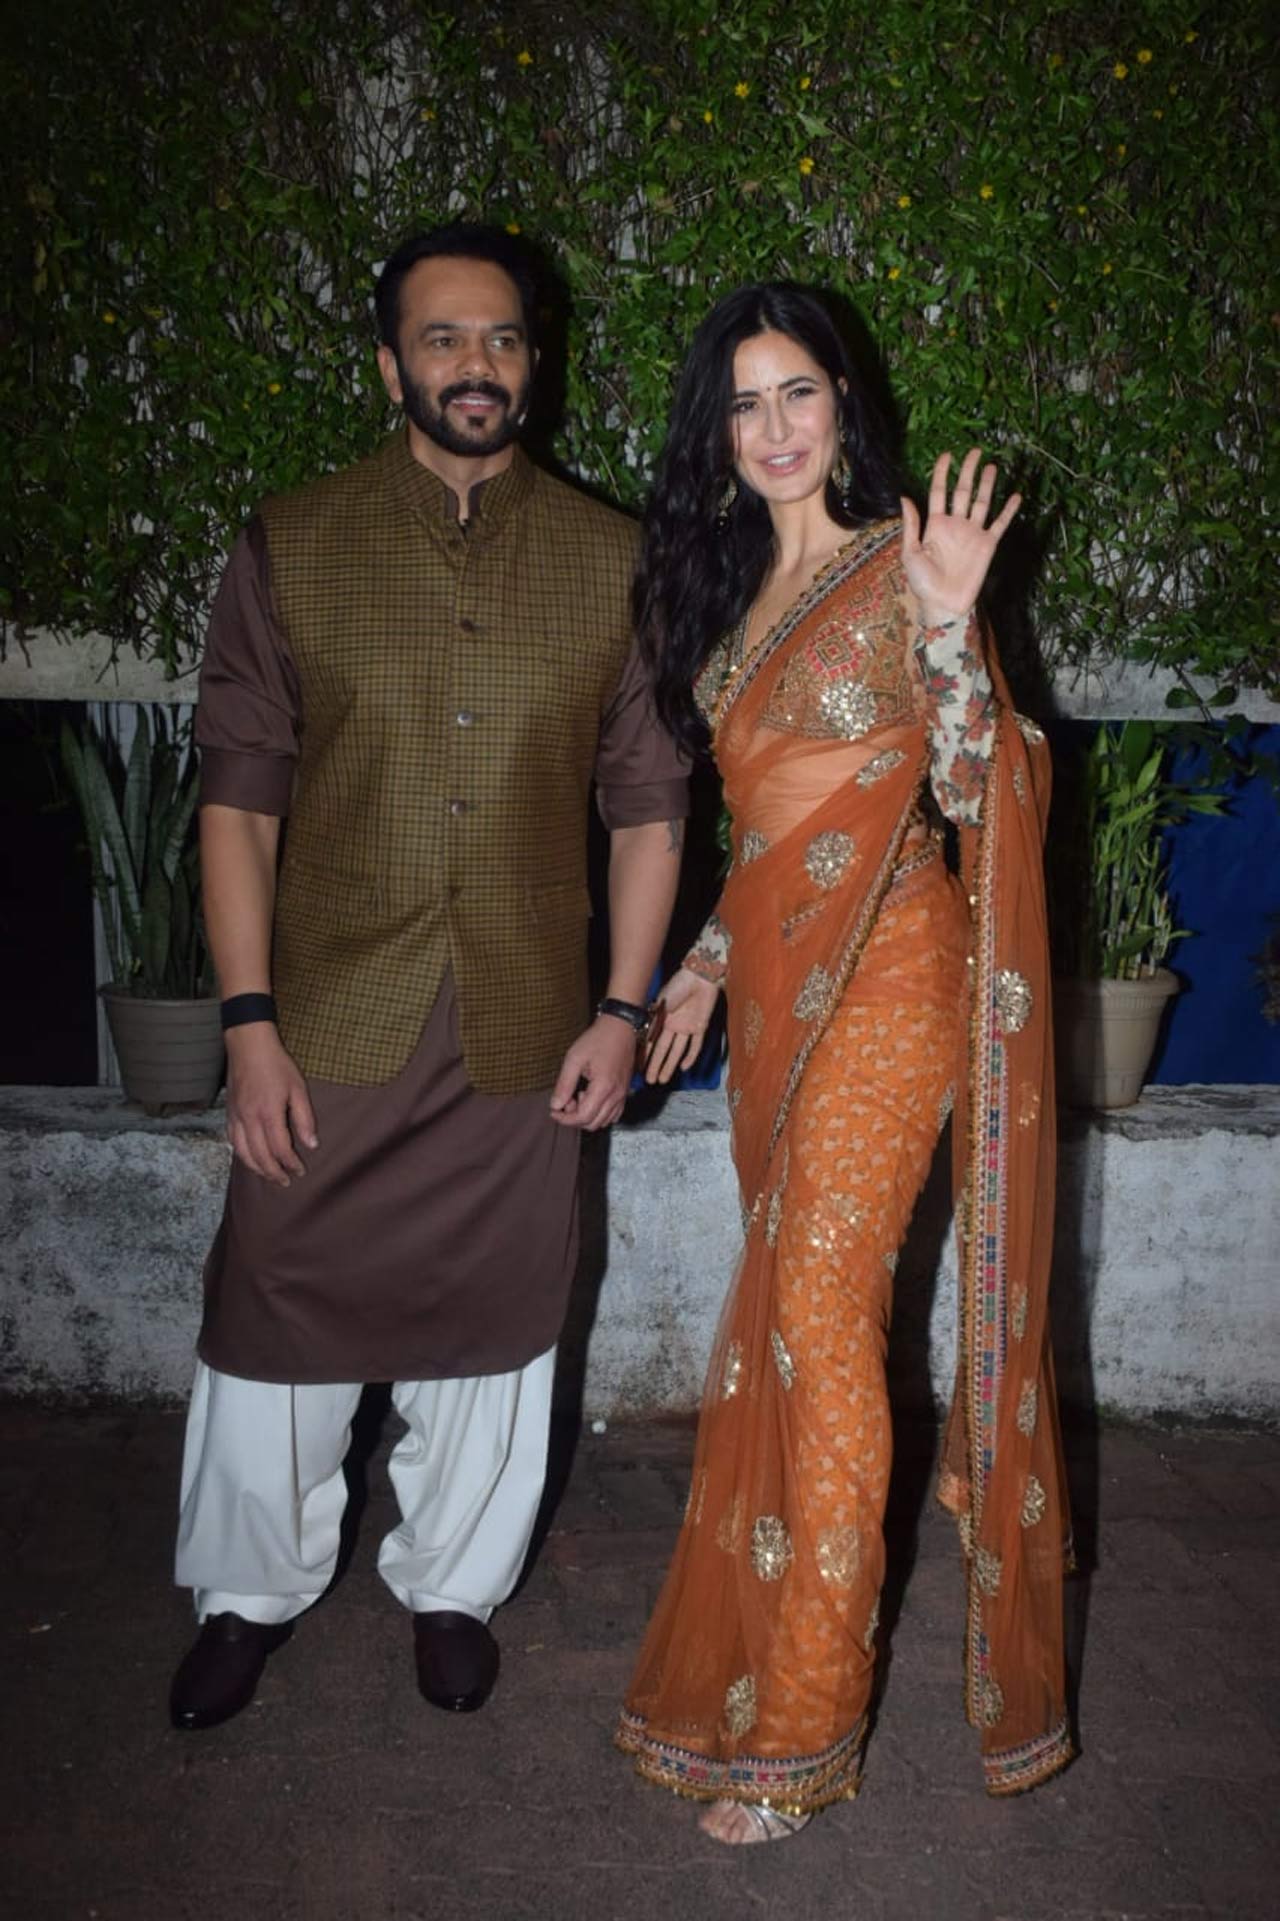 Katrina Kaif's net saree is giving us all the much-needed festive vibe. Her floral full-sleeved blouse, paired with the orange coloured saree seems like a perfect Diwali attire. What do you think? 